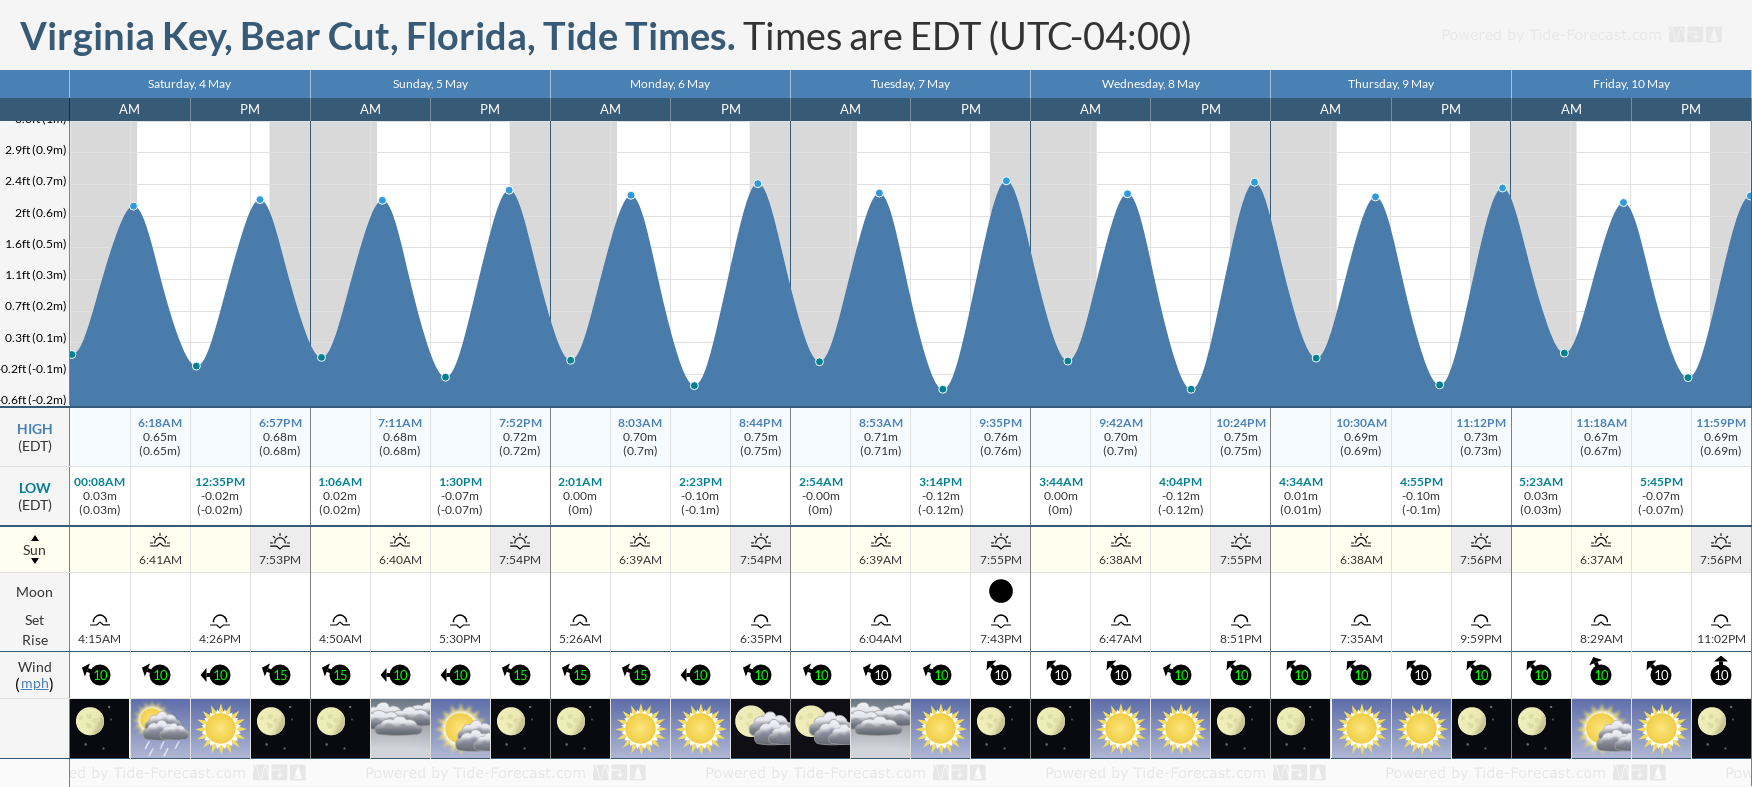 Virginia Key, Bear Cut, Florida Tide Chart including high and low tide tide times for the next 7 days